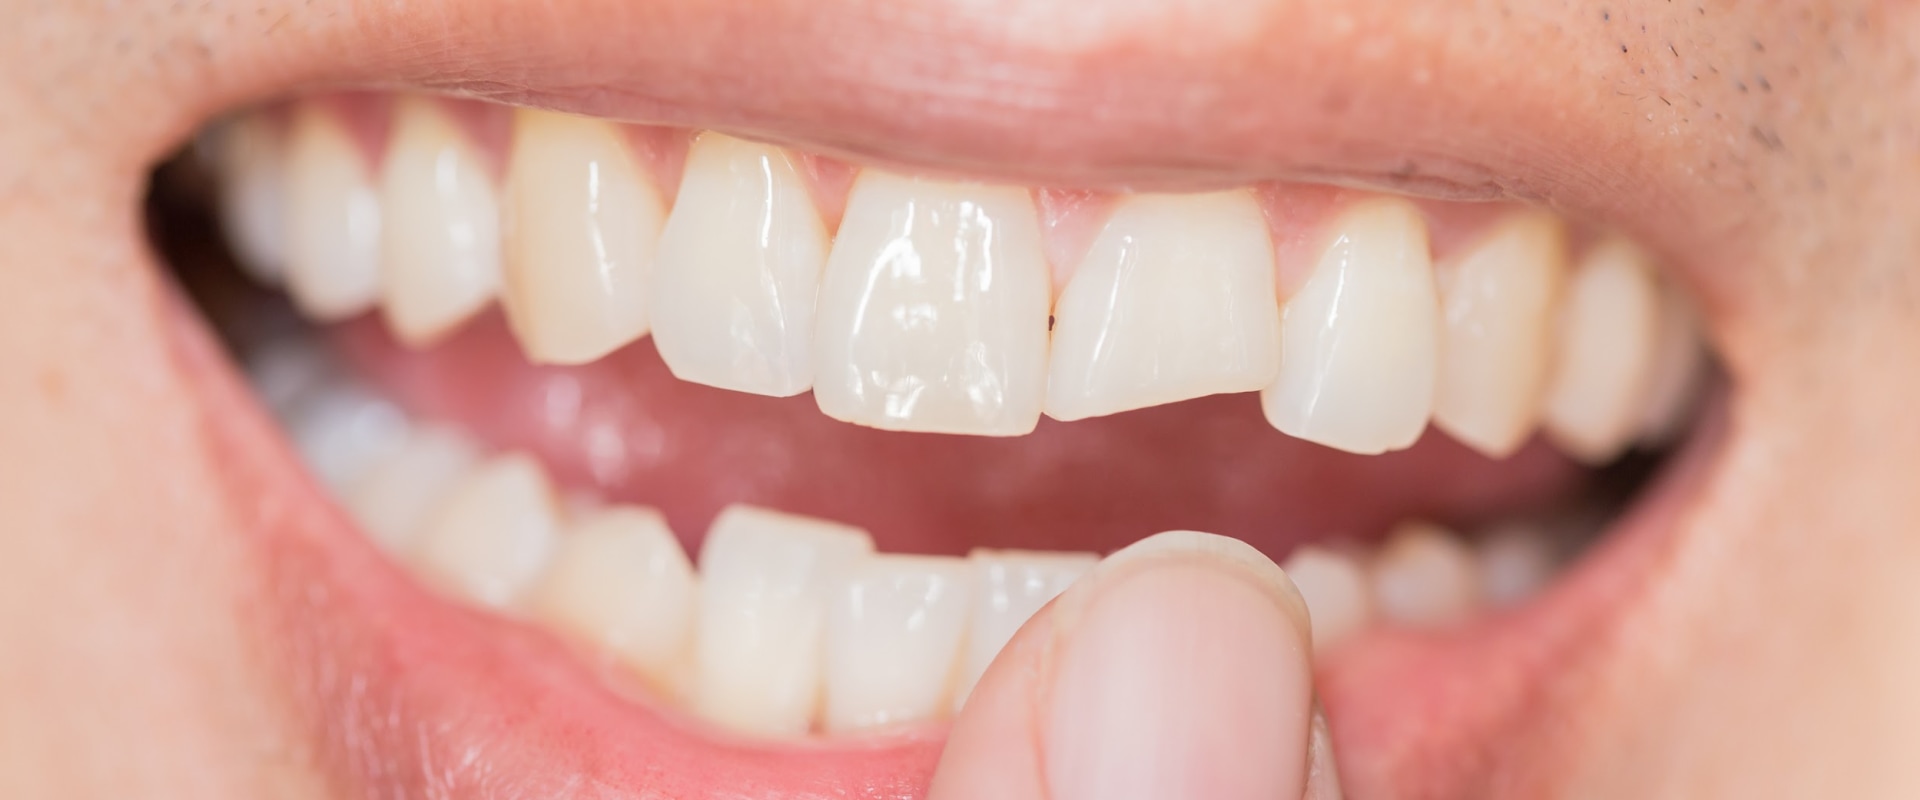 How Long Does It Take for a Chipped Tooth to Become Infected?